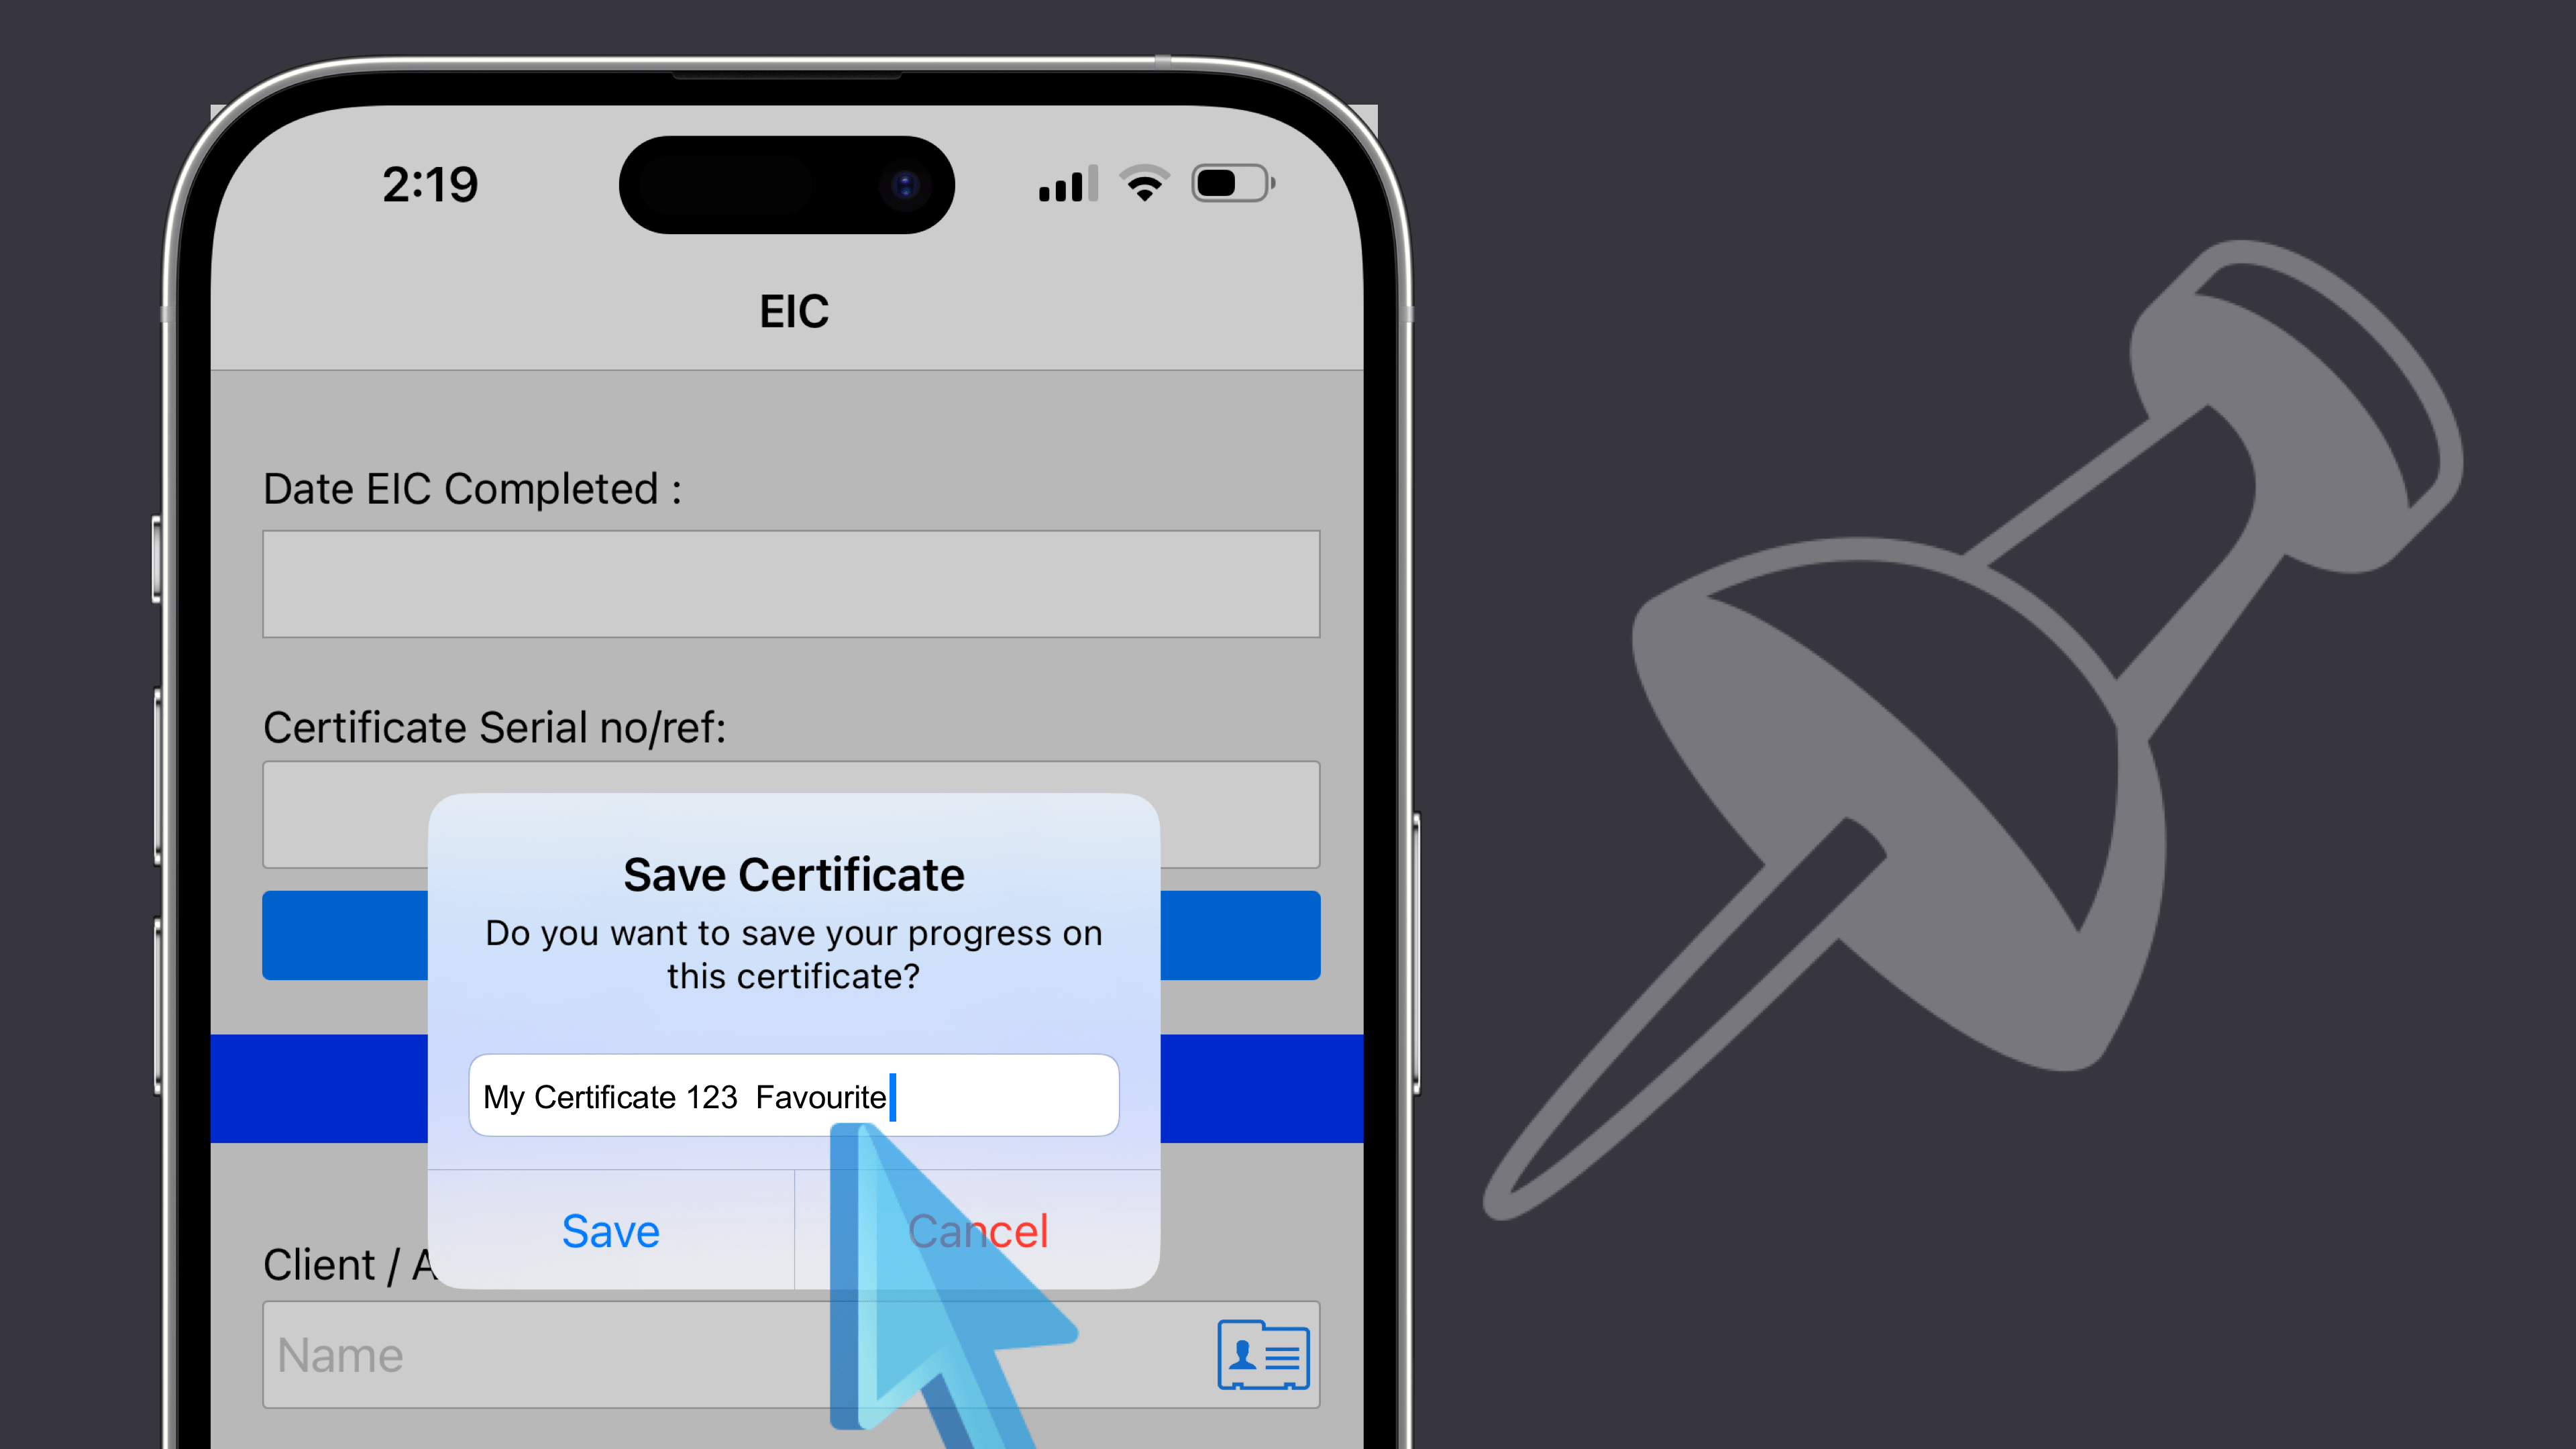 Streamline your certificate management with the Favourite feature in iCertifi V, keeping your most important certificates at your fingertips for easy access during annual inspections. Simply add 'favourite' to the file name of your saved certificates and templates to ensure they stay pinned at the top of your list for efficient organisation.